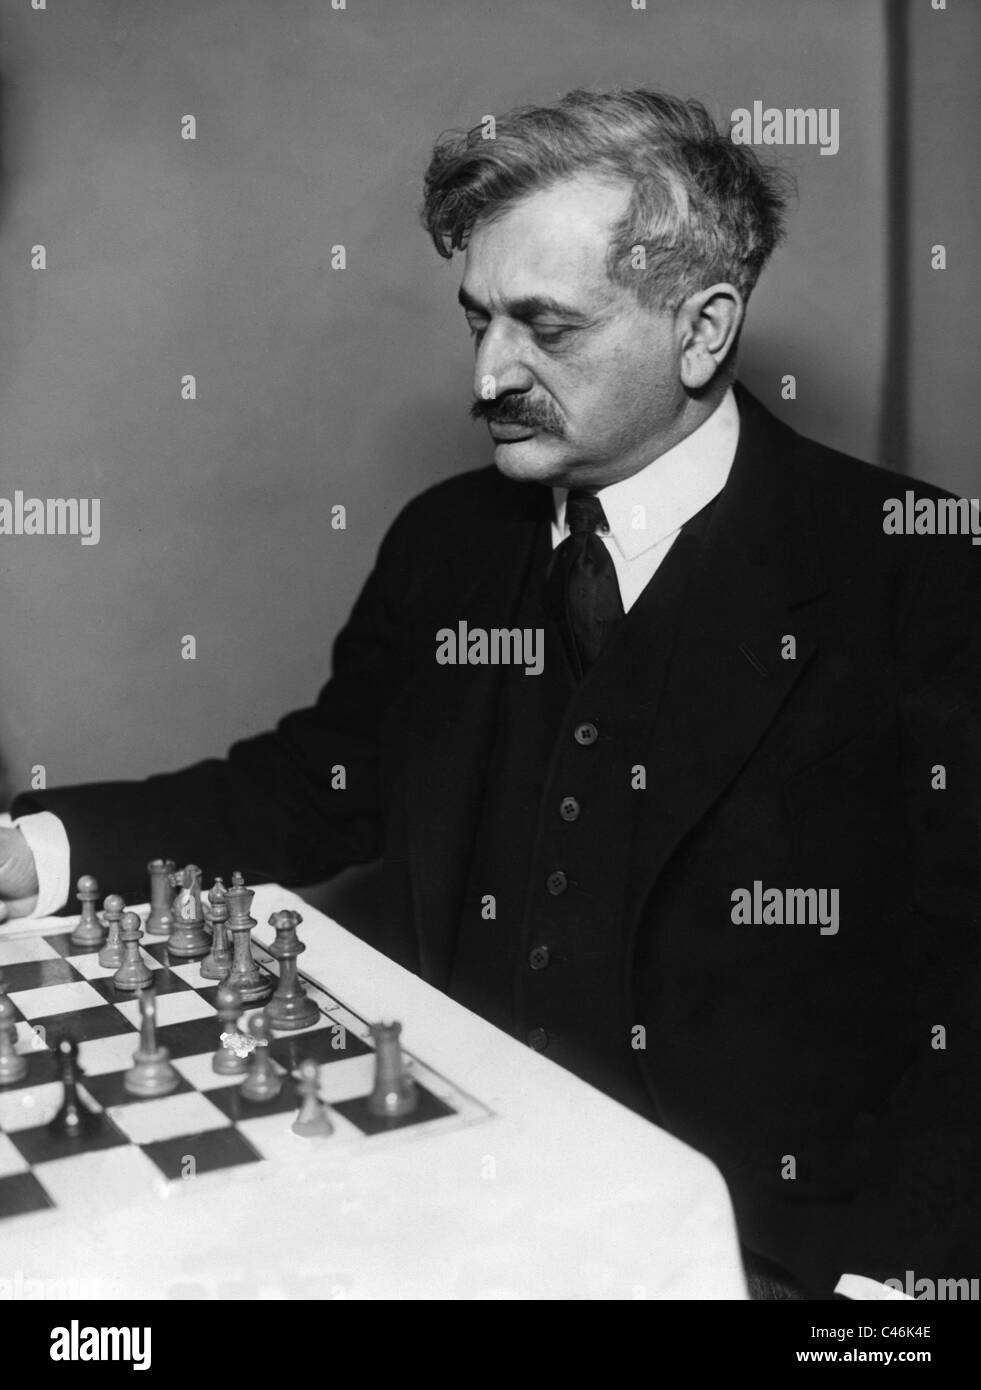 Alexander alekhine playing chess hi-res stock photography and images - Alamy